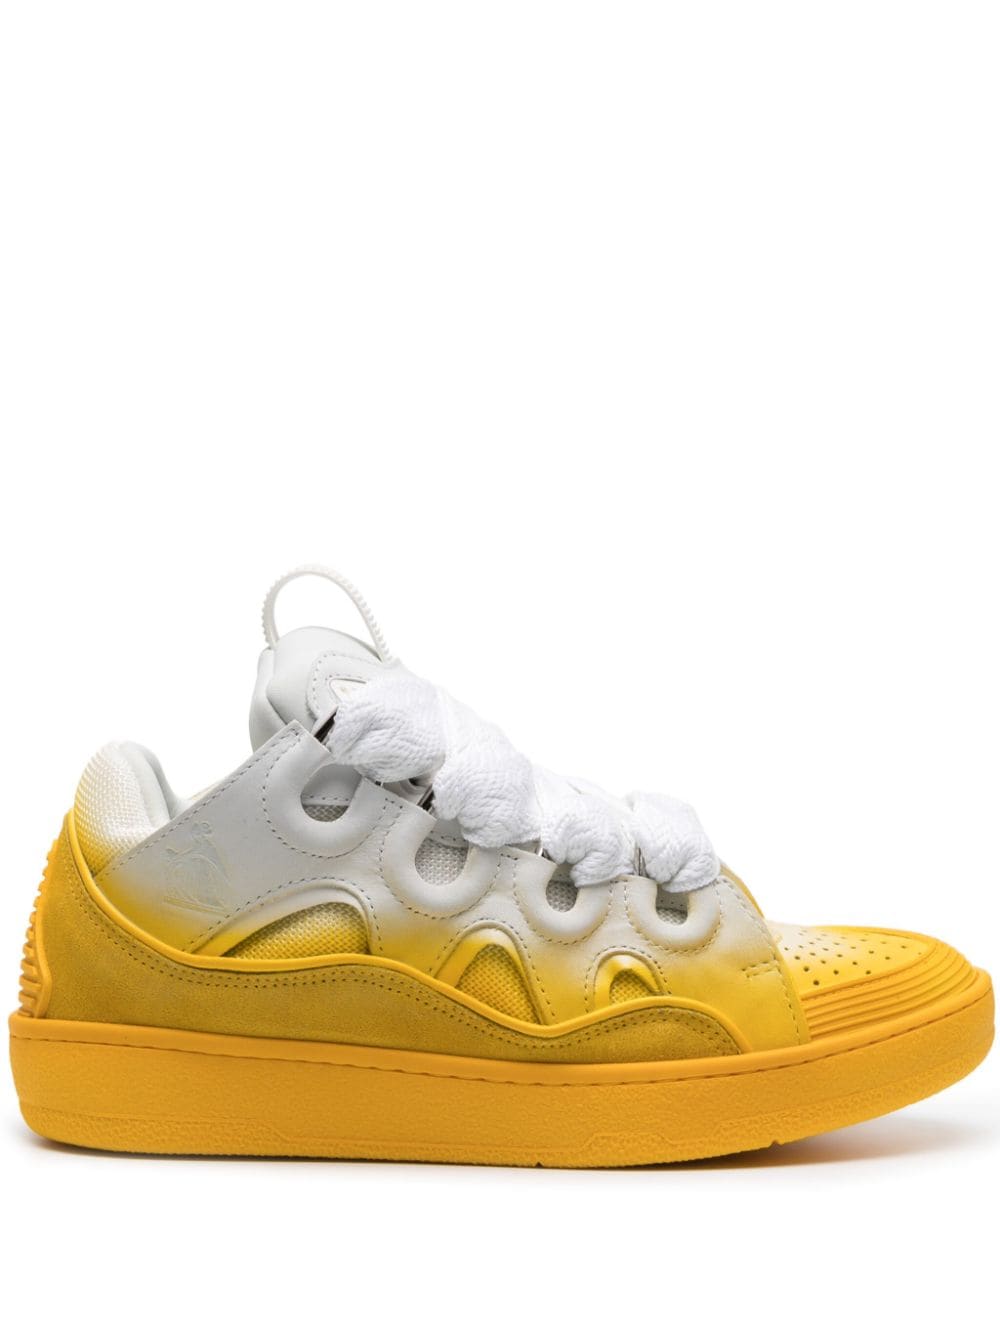 Lanvin Curb spray-painted leather sneakers - Yellow von Lanvin